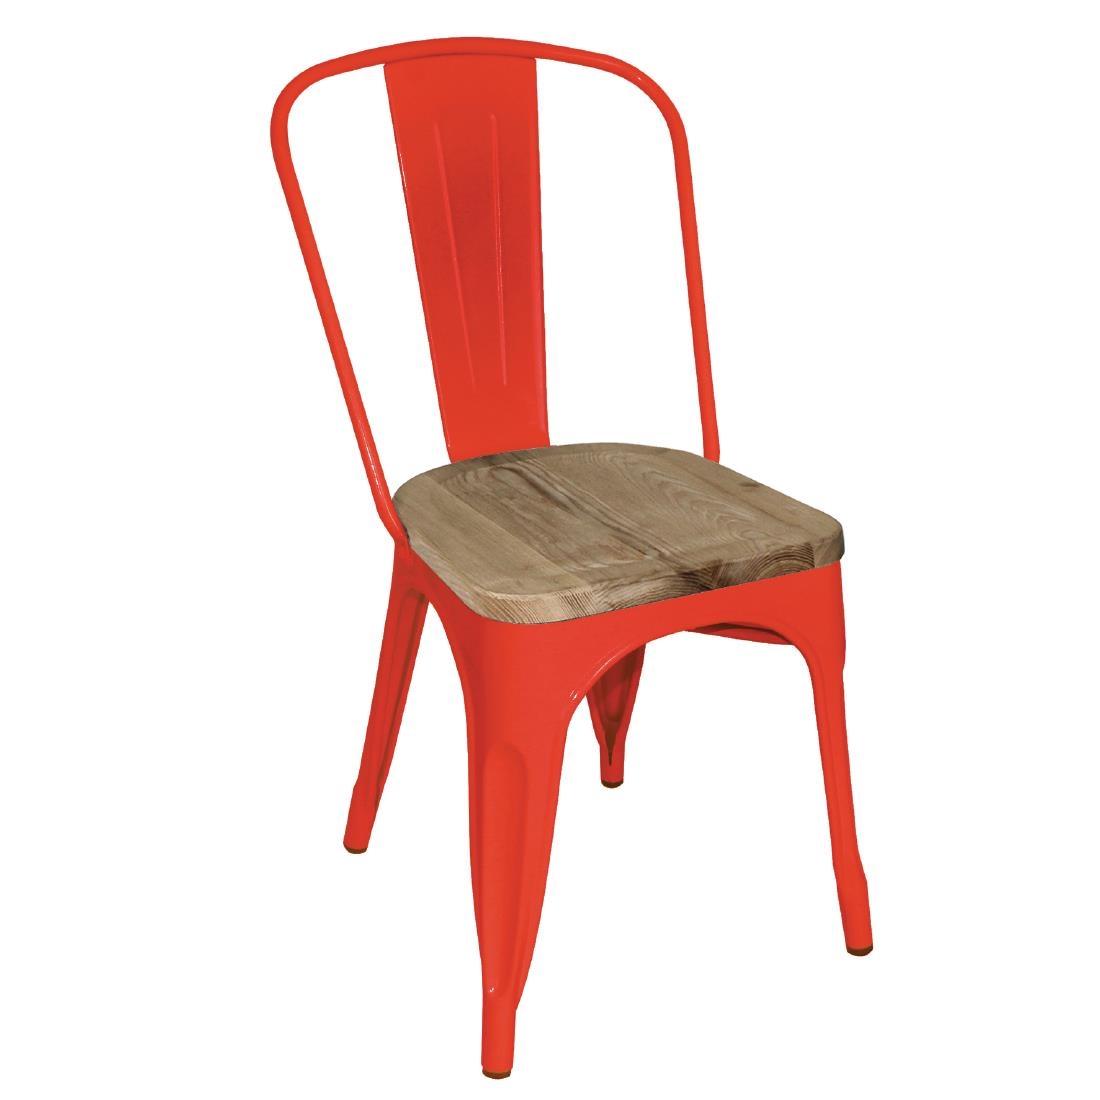 Bolero Bistro Side Chairs with Wooden Seat Pad Red (Pack of 4) - GM643  - 1